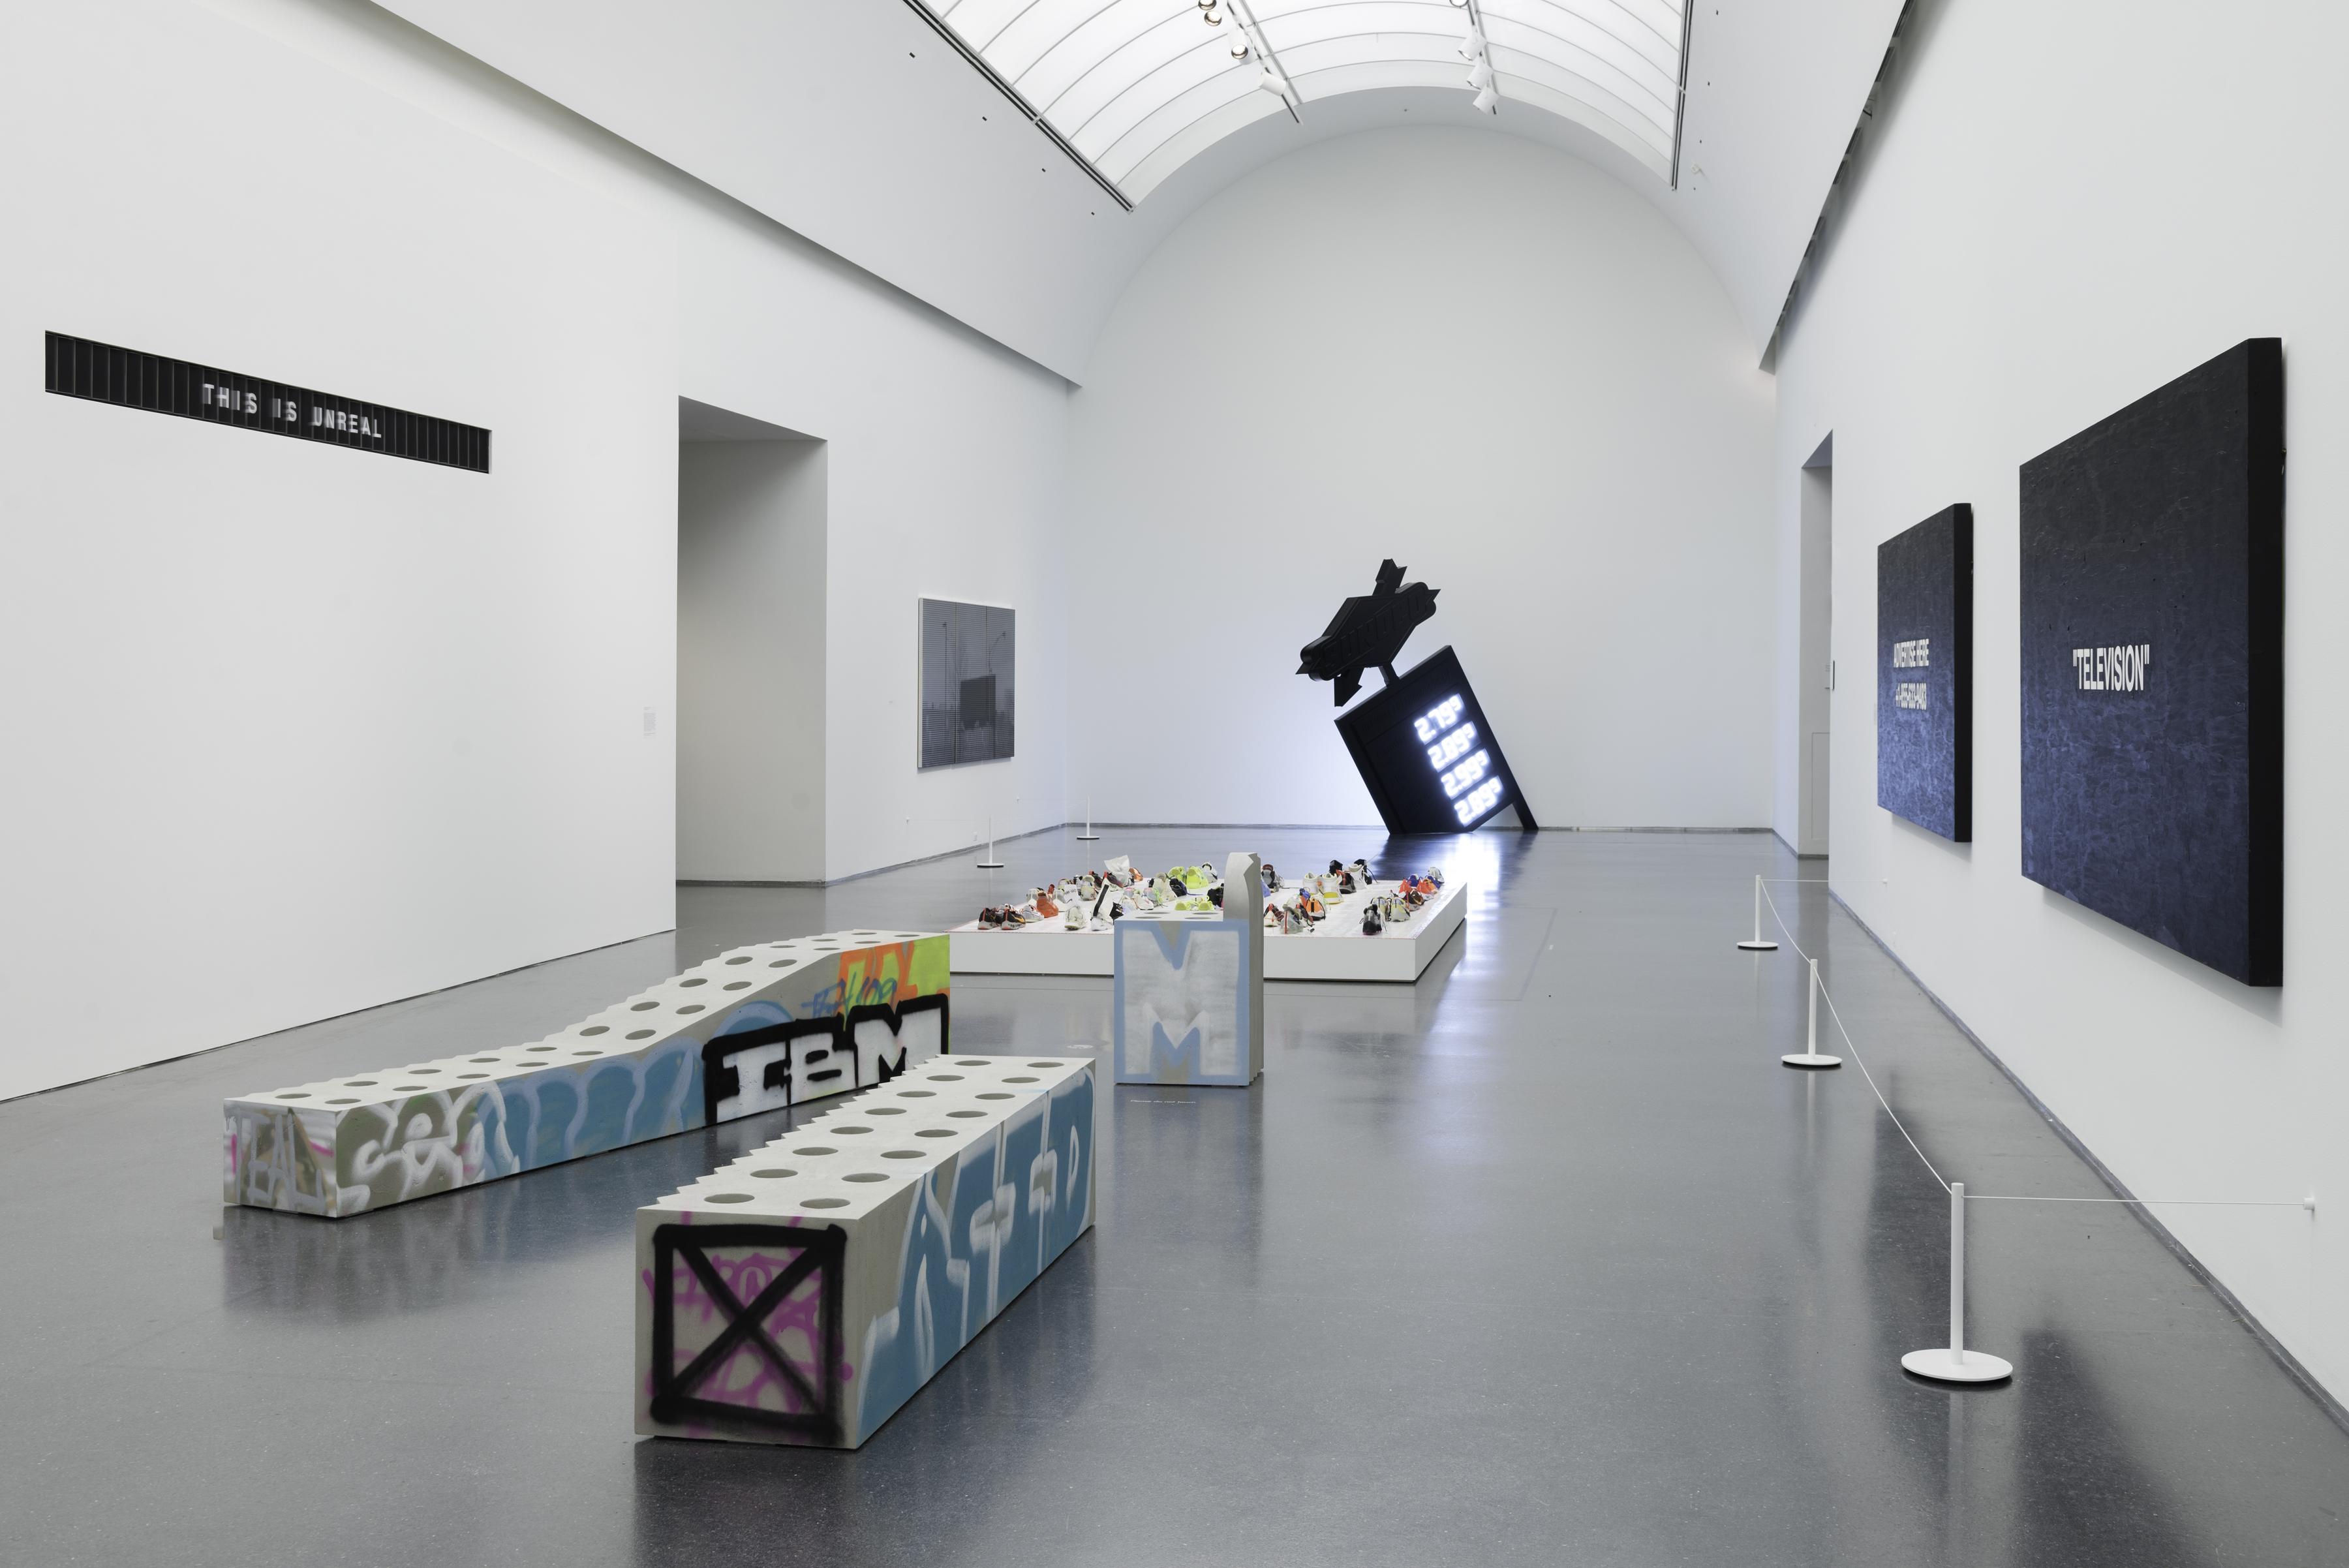 At The ICA, Virgil Abloh's 'Figures Of Speech' Offers Loaded Words